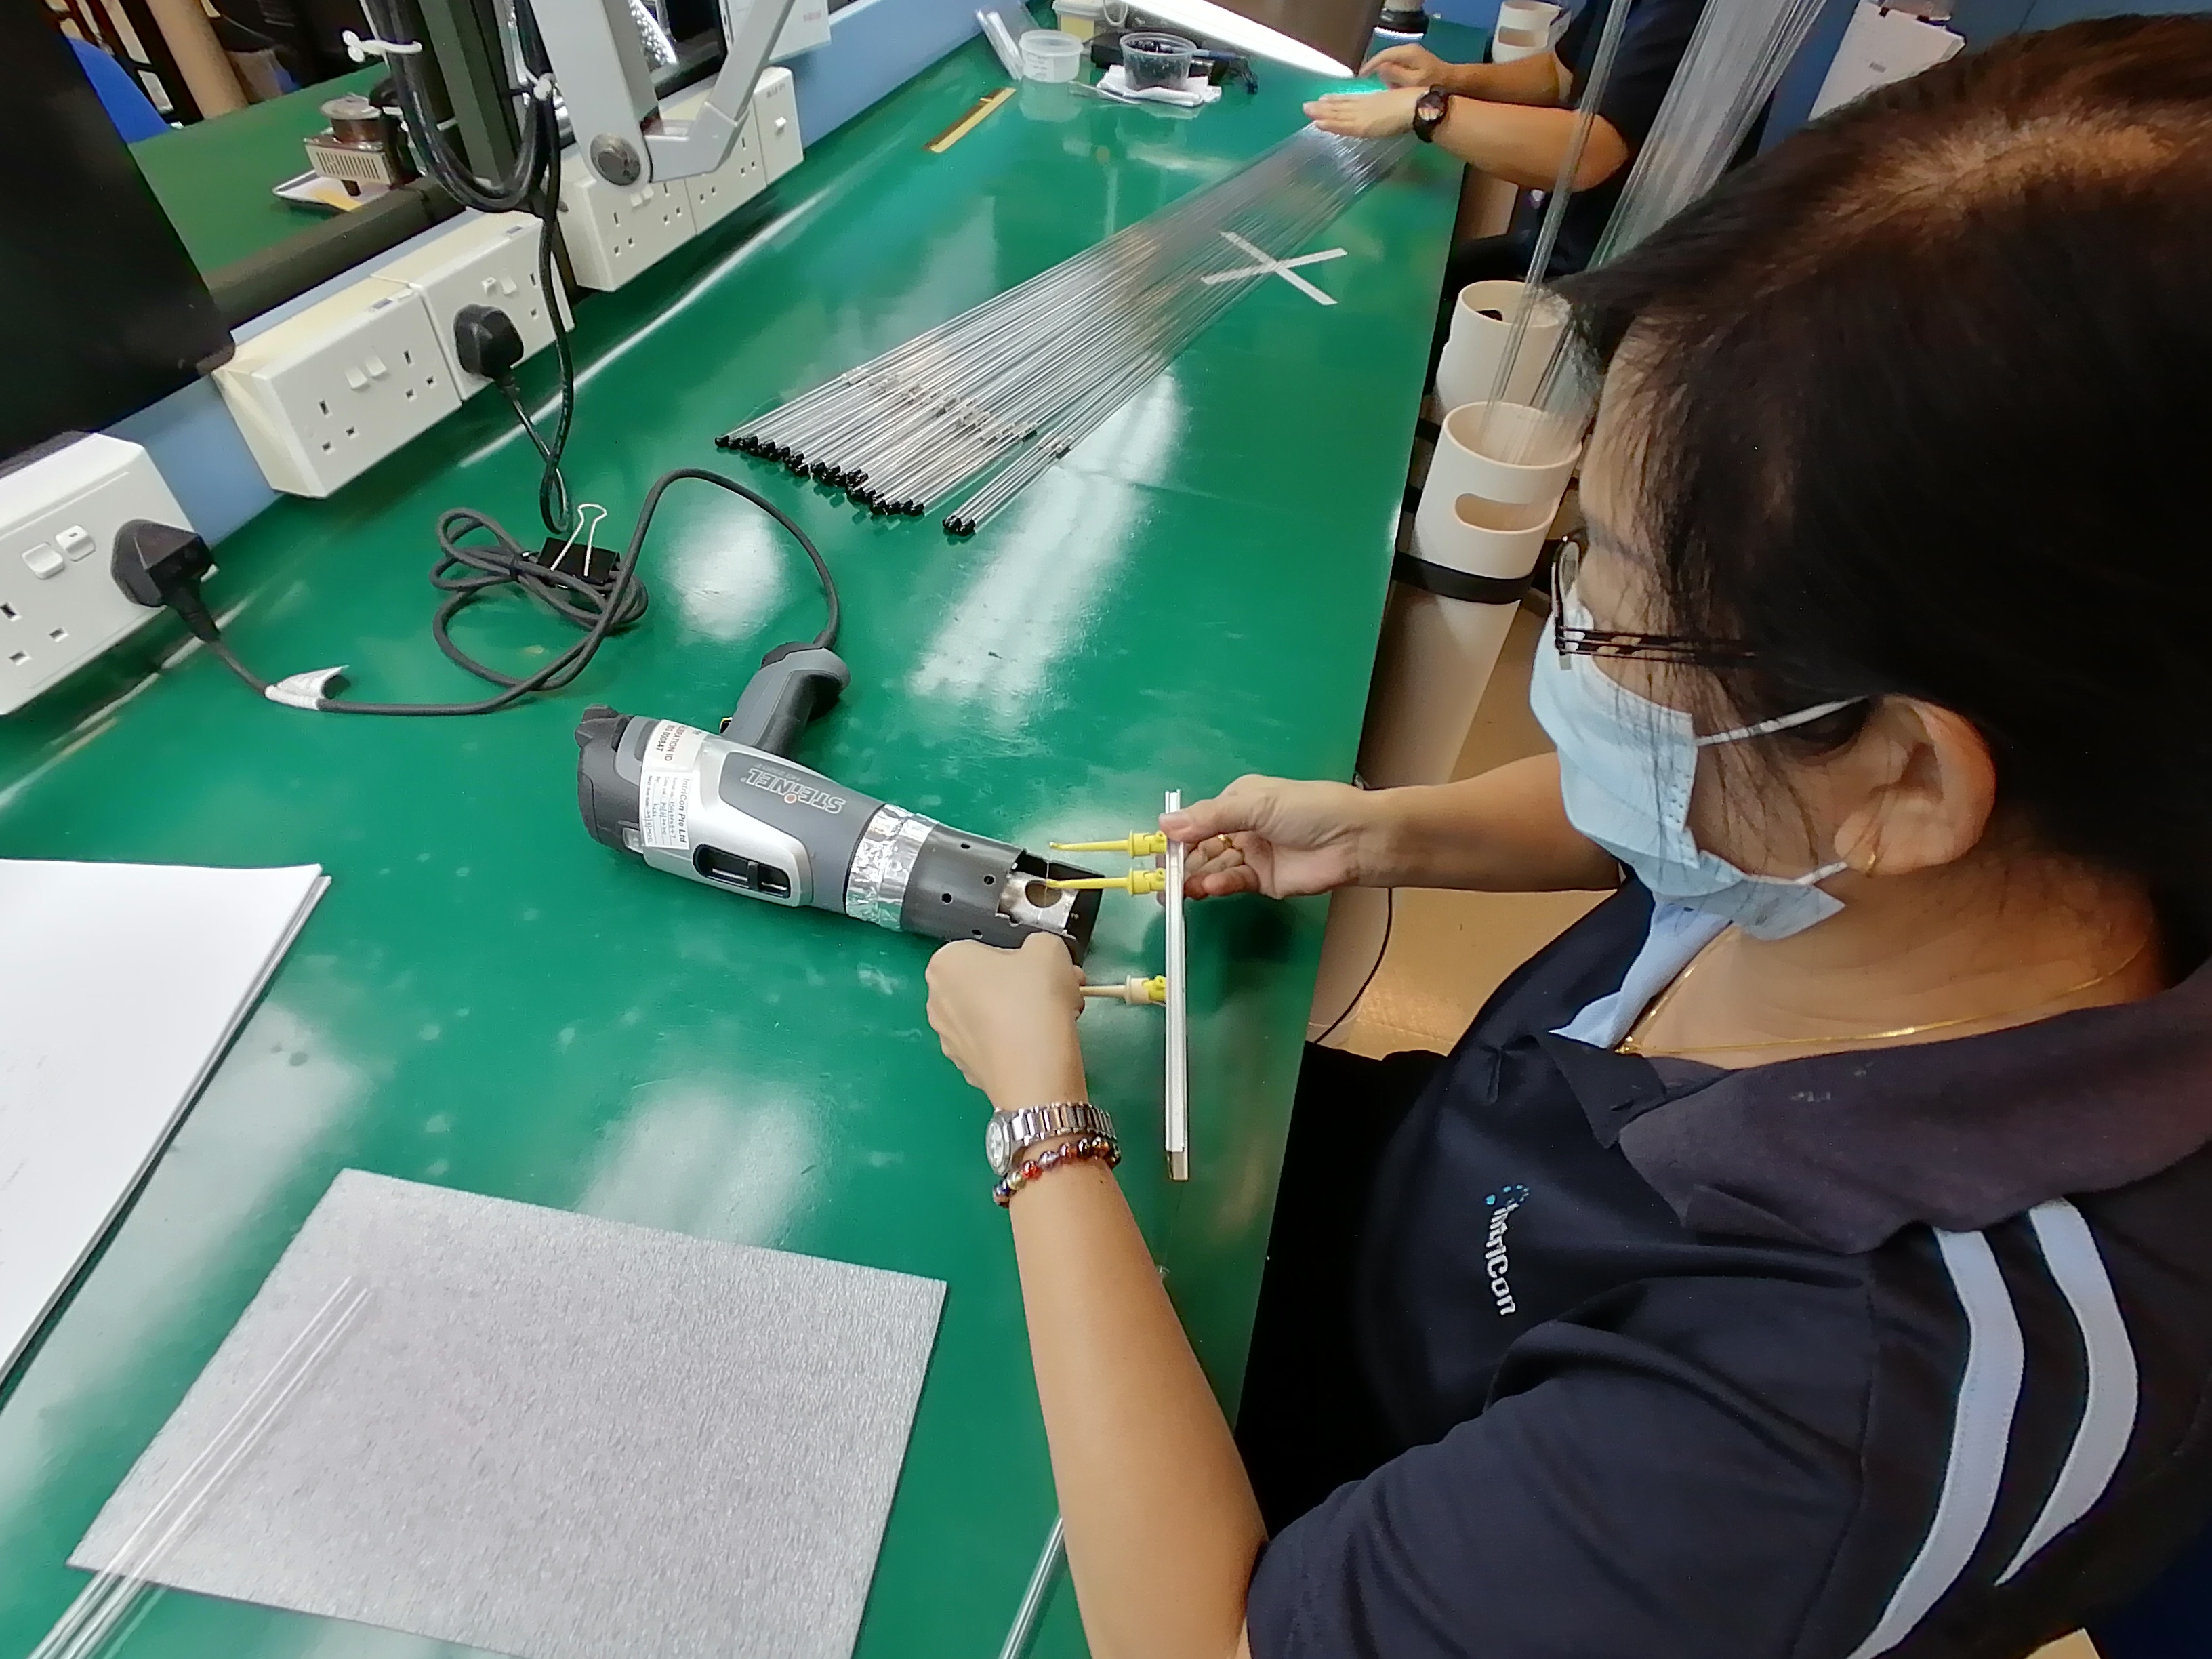 A view of the manufacturing process at Intricon, a global leader in micromedical technology and joint development manufacturer